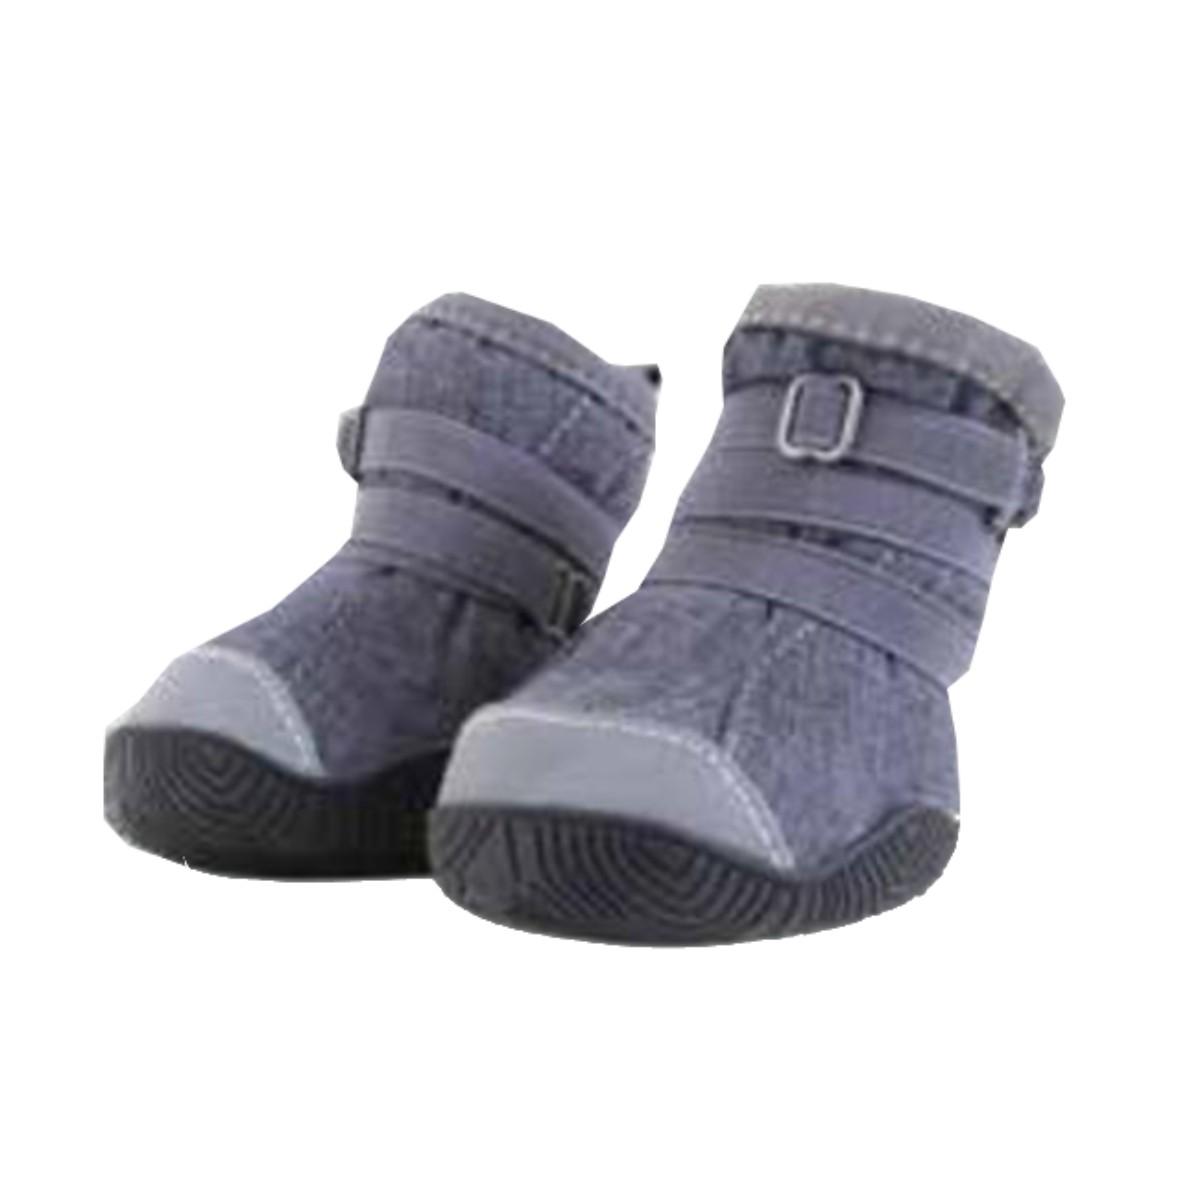 Hurtta Expedition Dog Boots - Blackberry